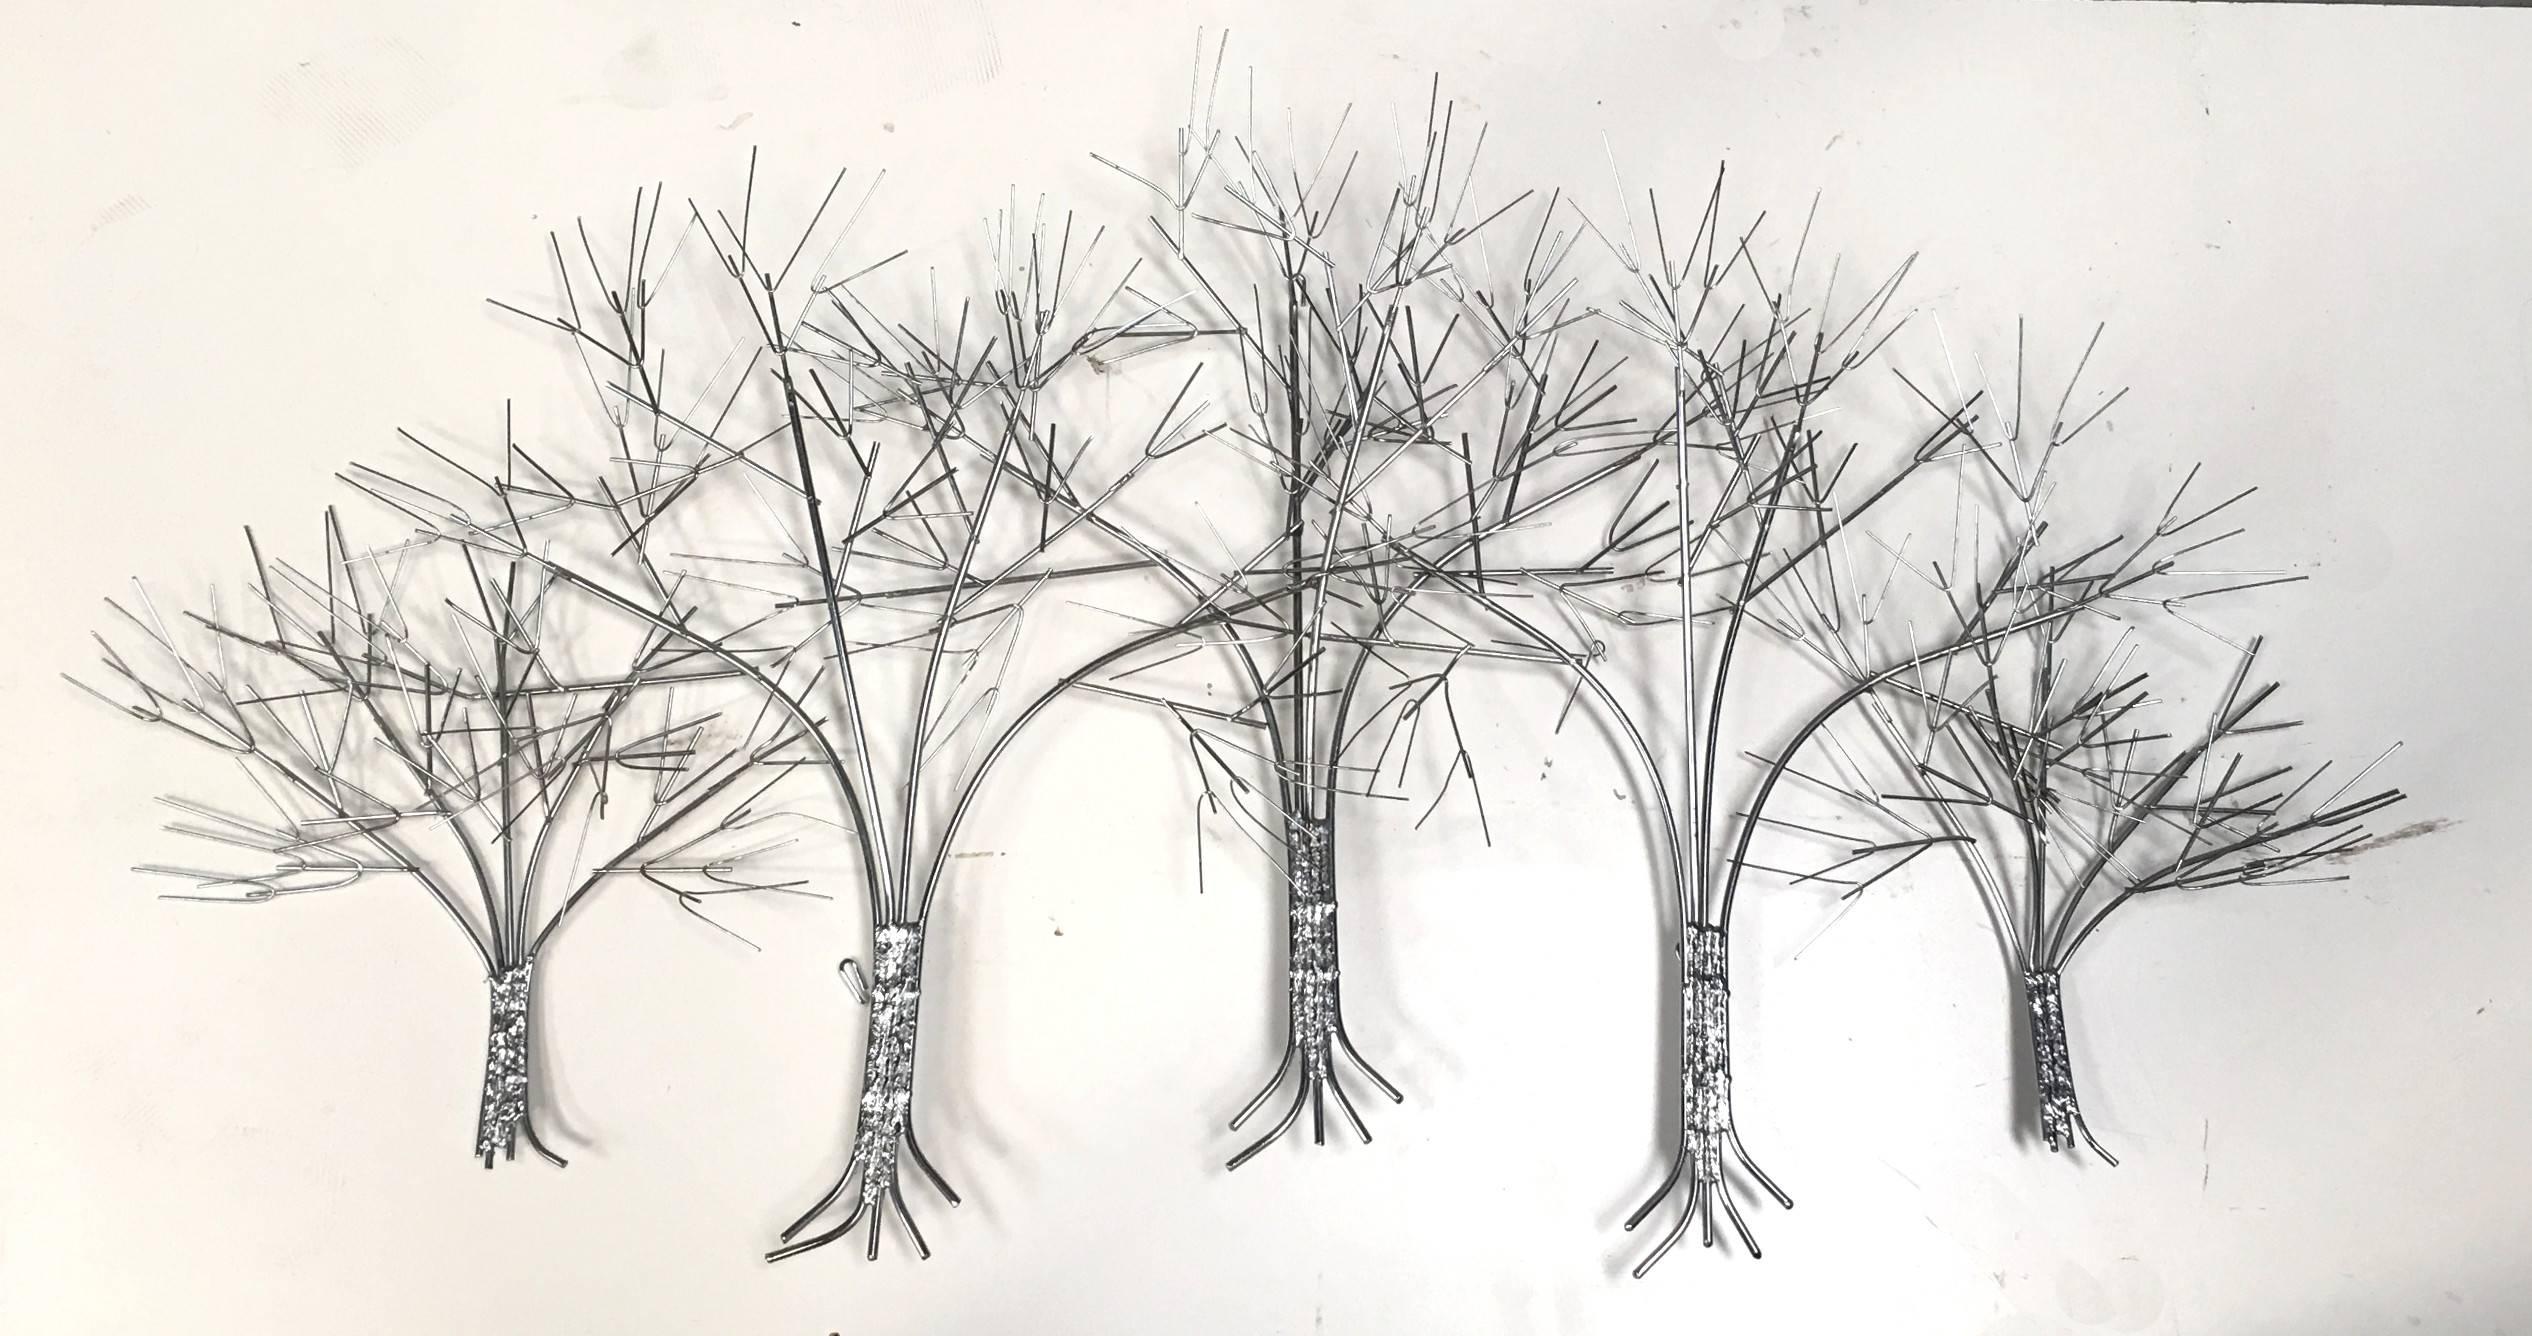 Large-scale wall sculpture depicting trees in winter by C. Jere. This larger than usual, signed piece is beautifully rendered and in excellent original condition.